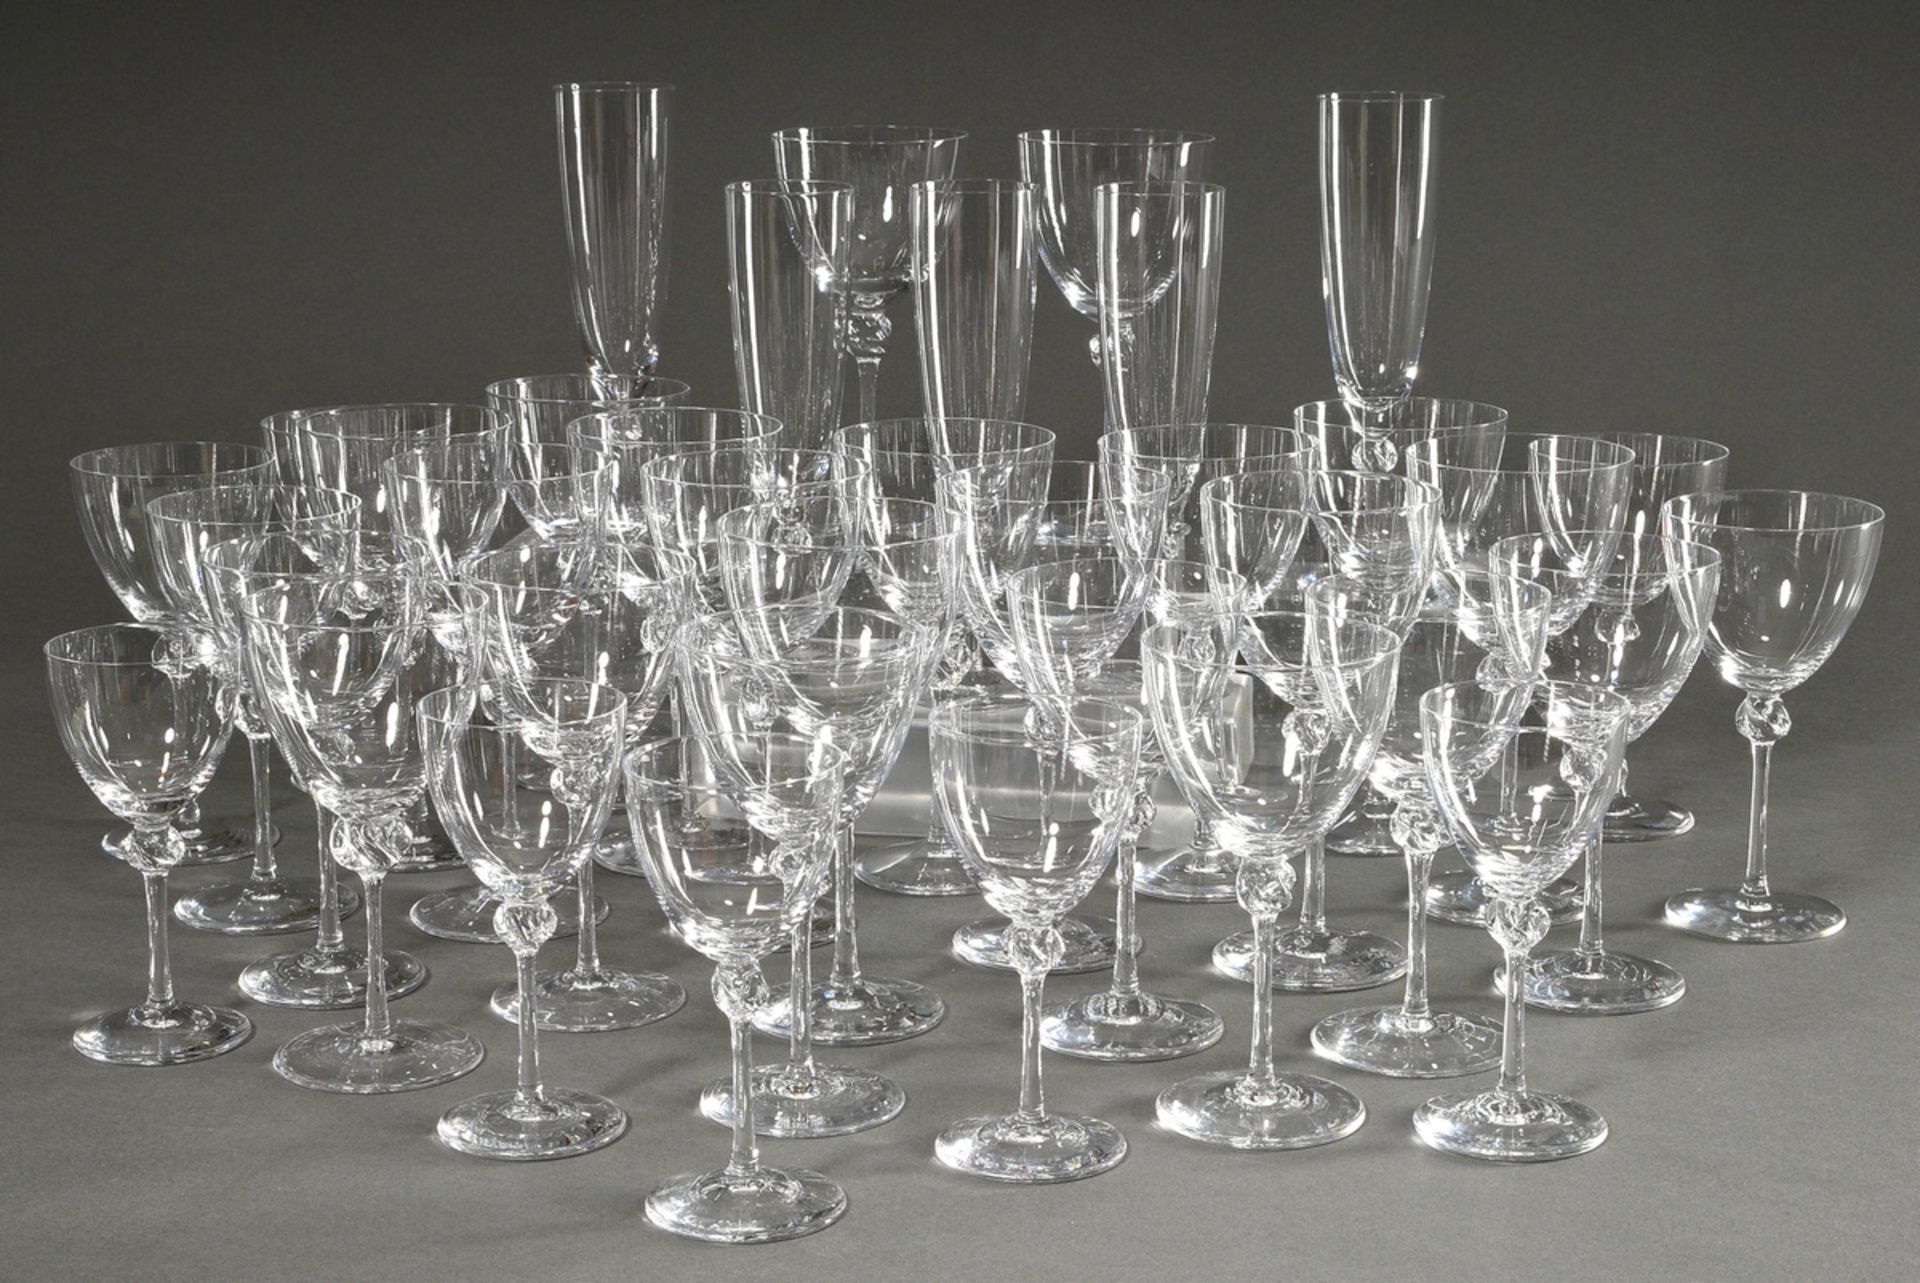 36 Daum Nancy "Boléro" glasses with delicate domes and knots in the stem: 14 large wine glasses (h.